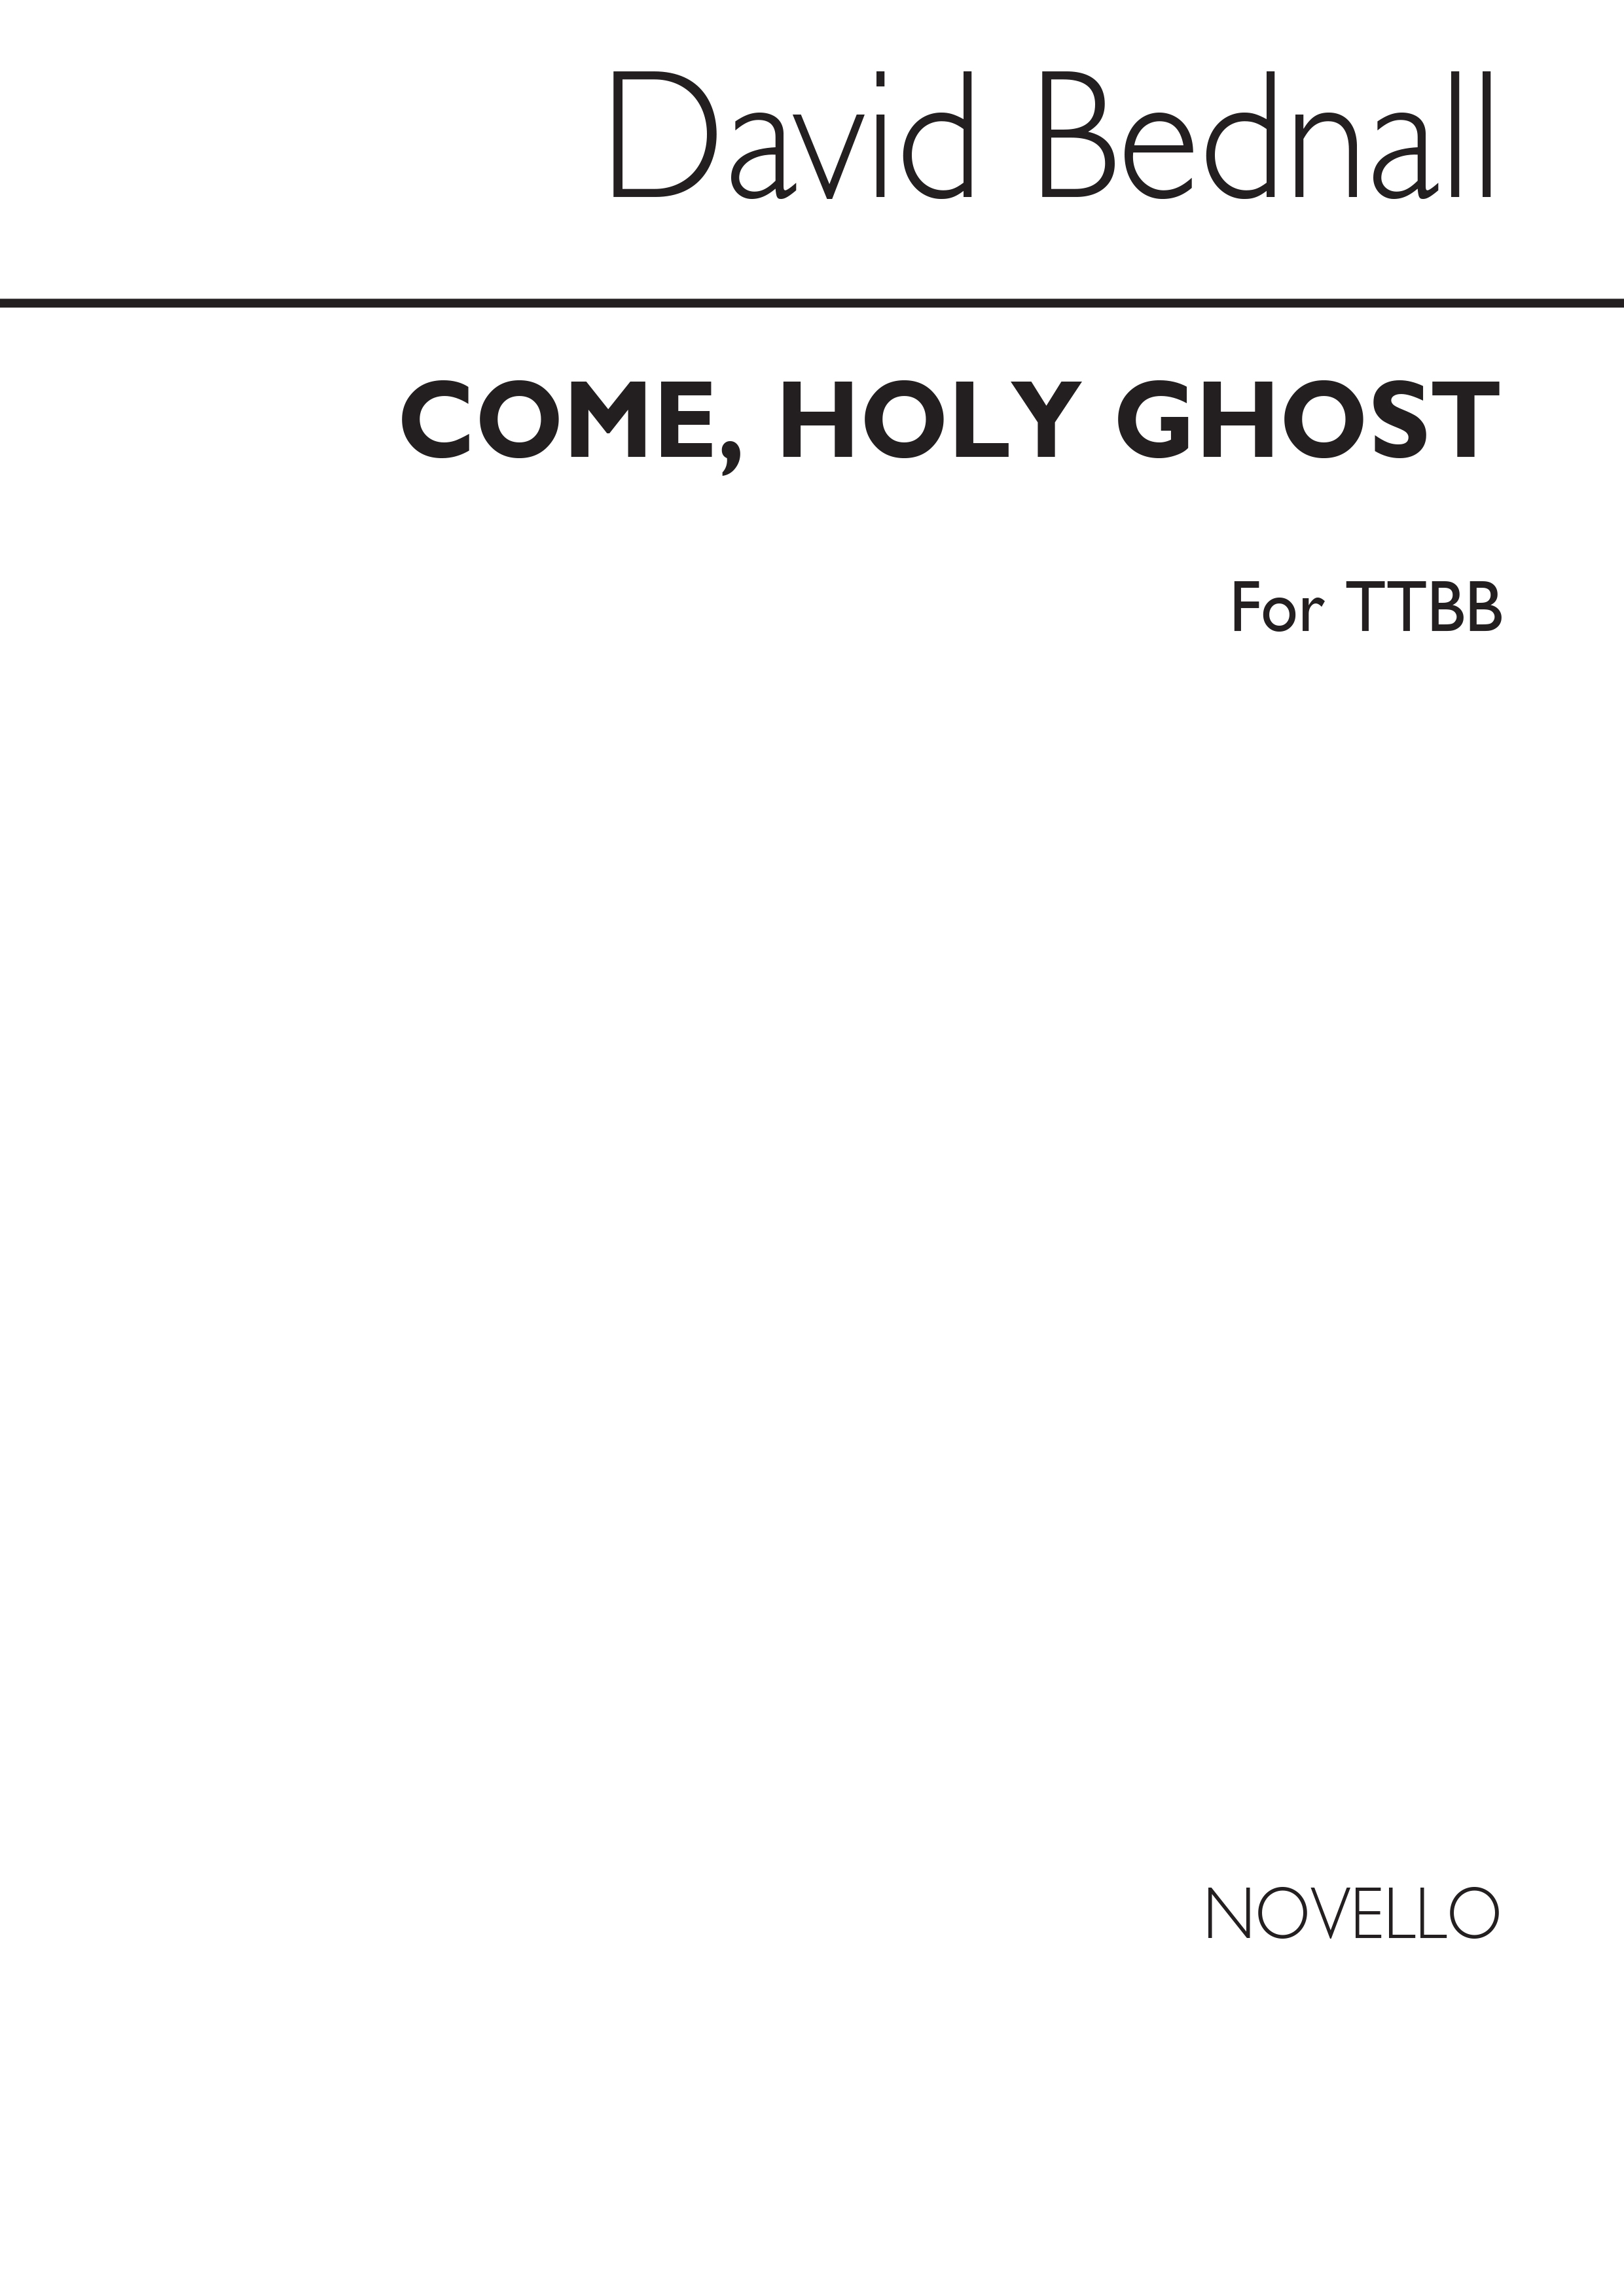 David Bednall: Come, Holy Ghost